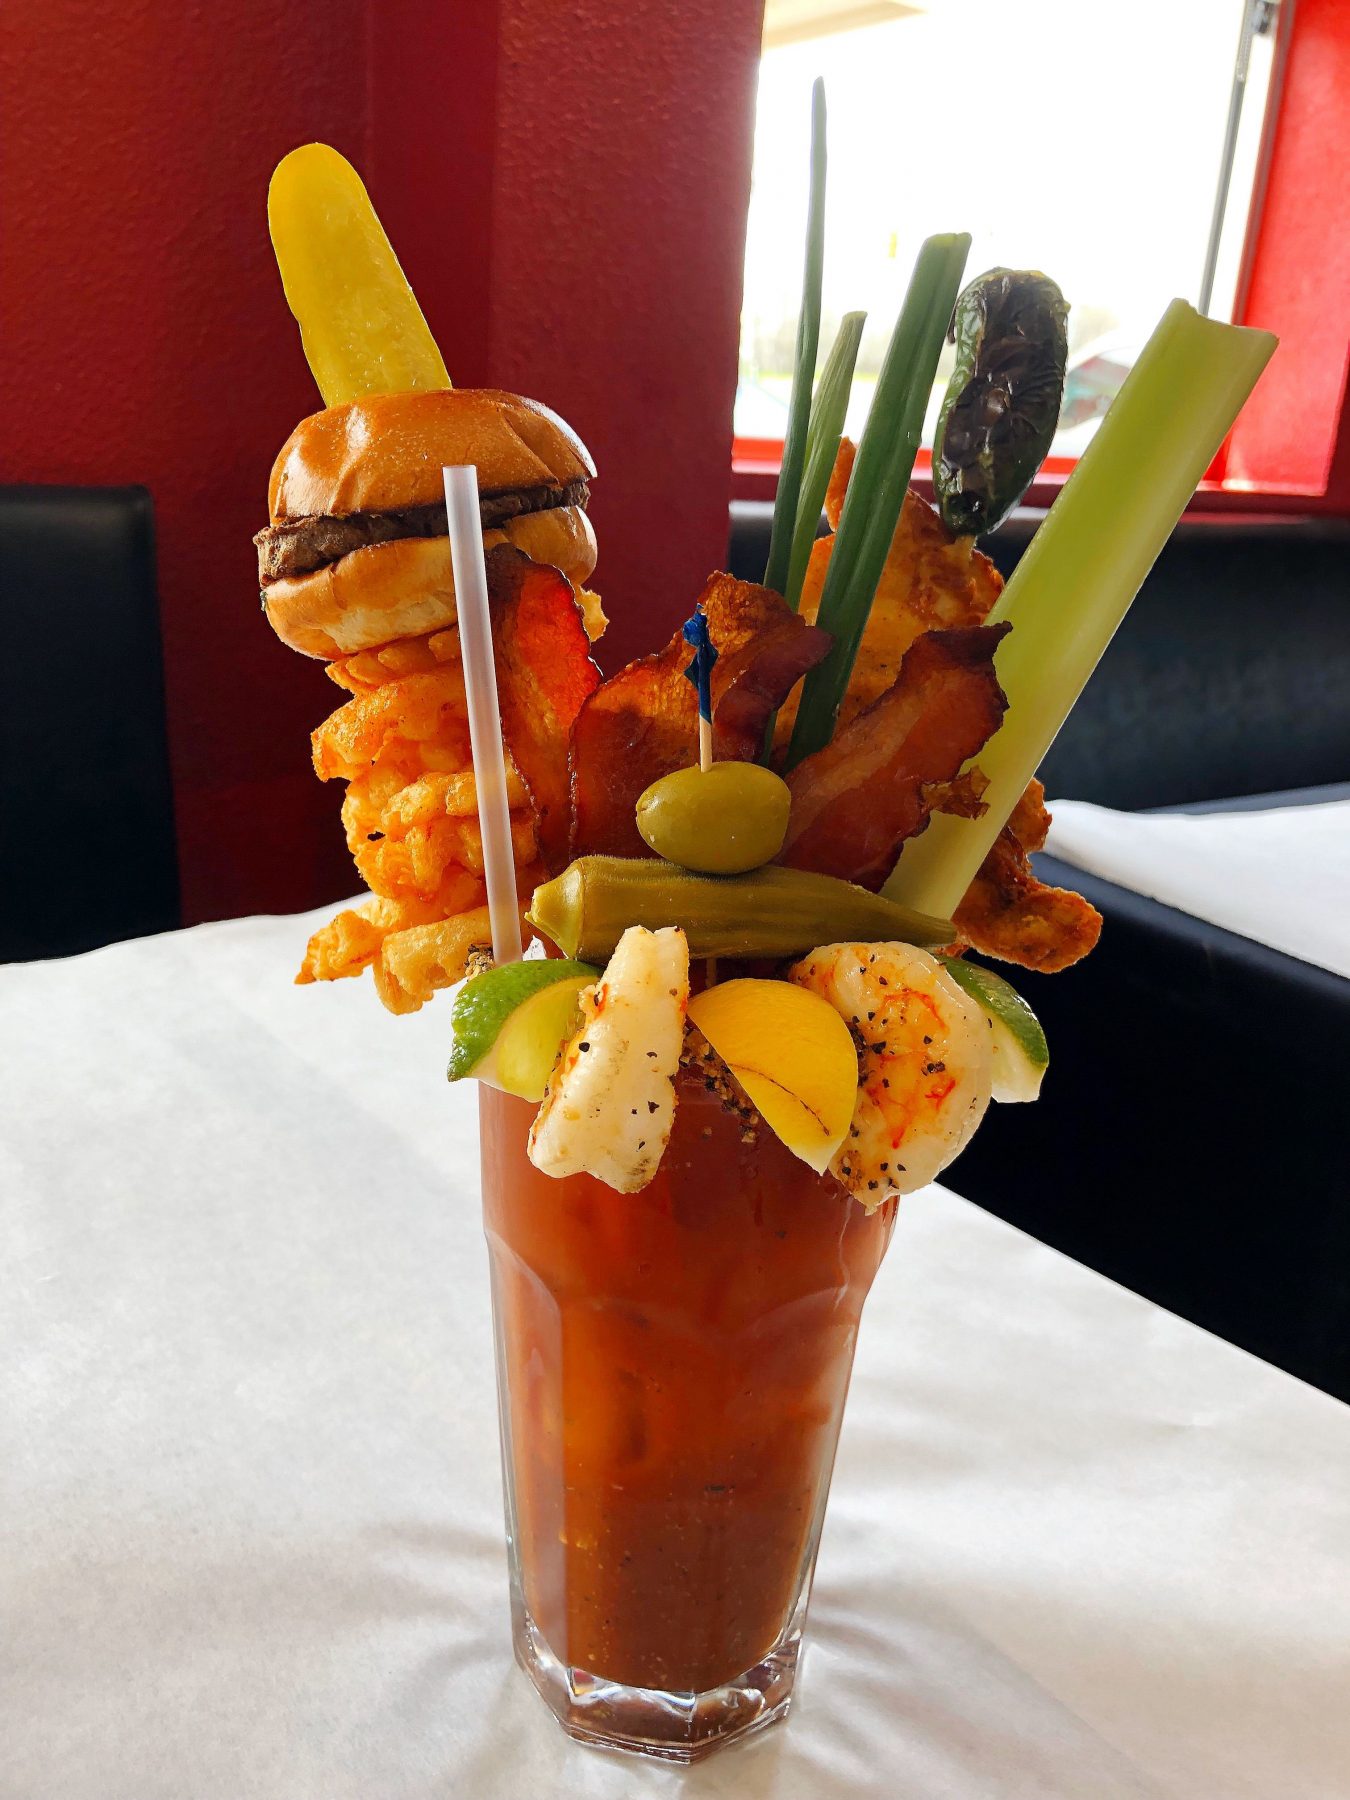 The Bloody Best Bloody Mary from Chef Point in Watauga. Photo by Michael Hoinski.